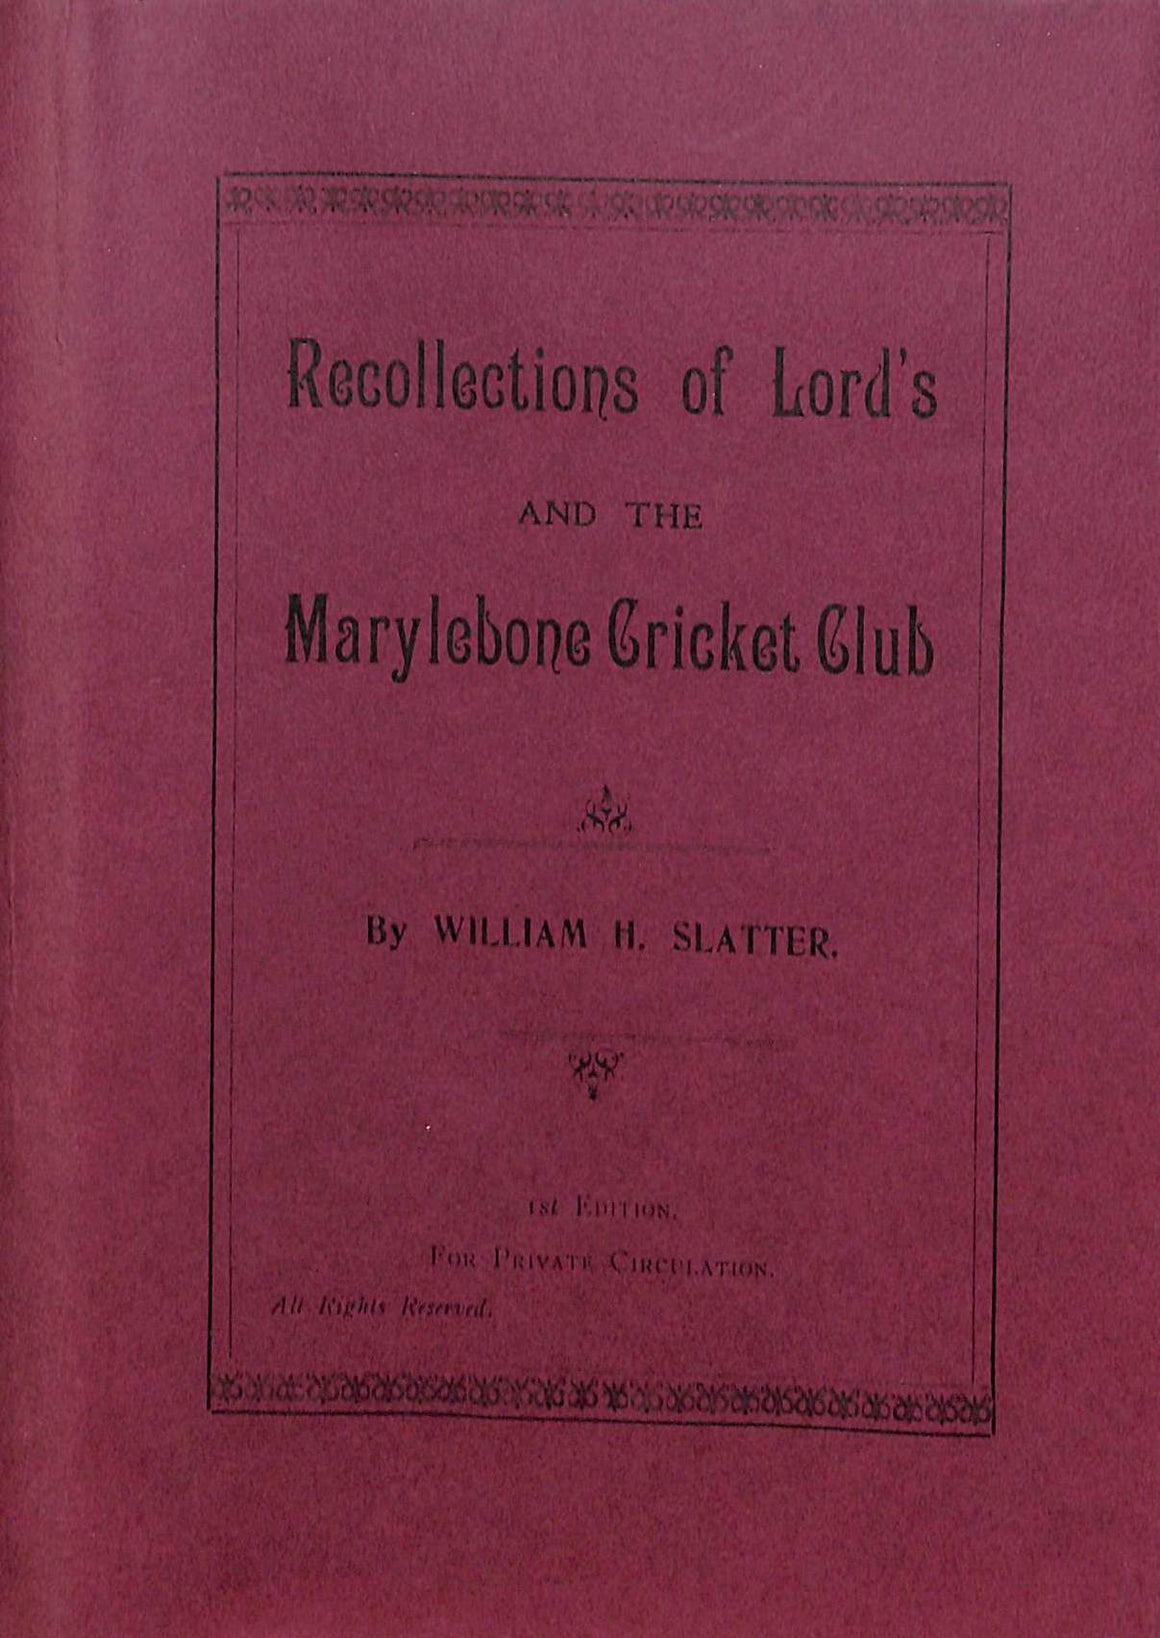 "Recollections Of Lord's And The Marylebone Cricket Club" 1989 SLATTER, William H.